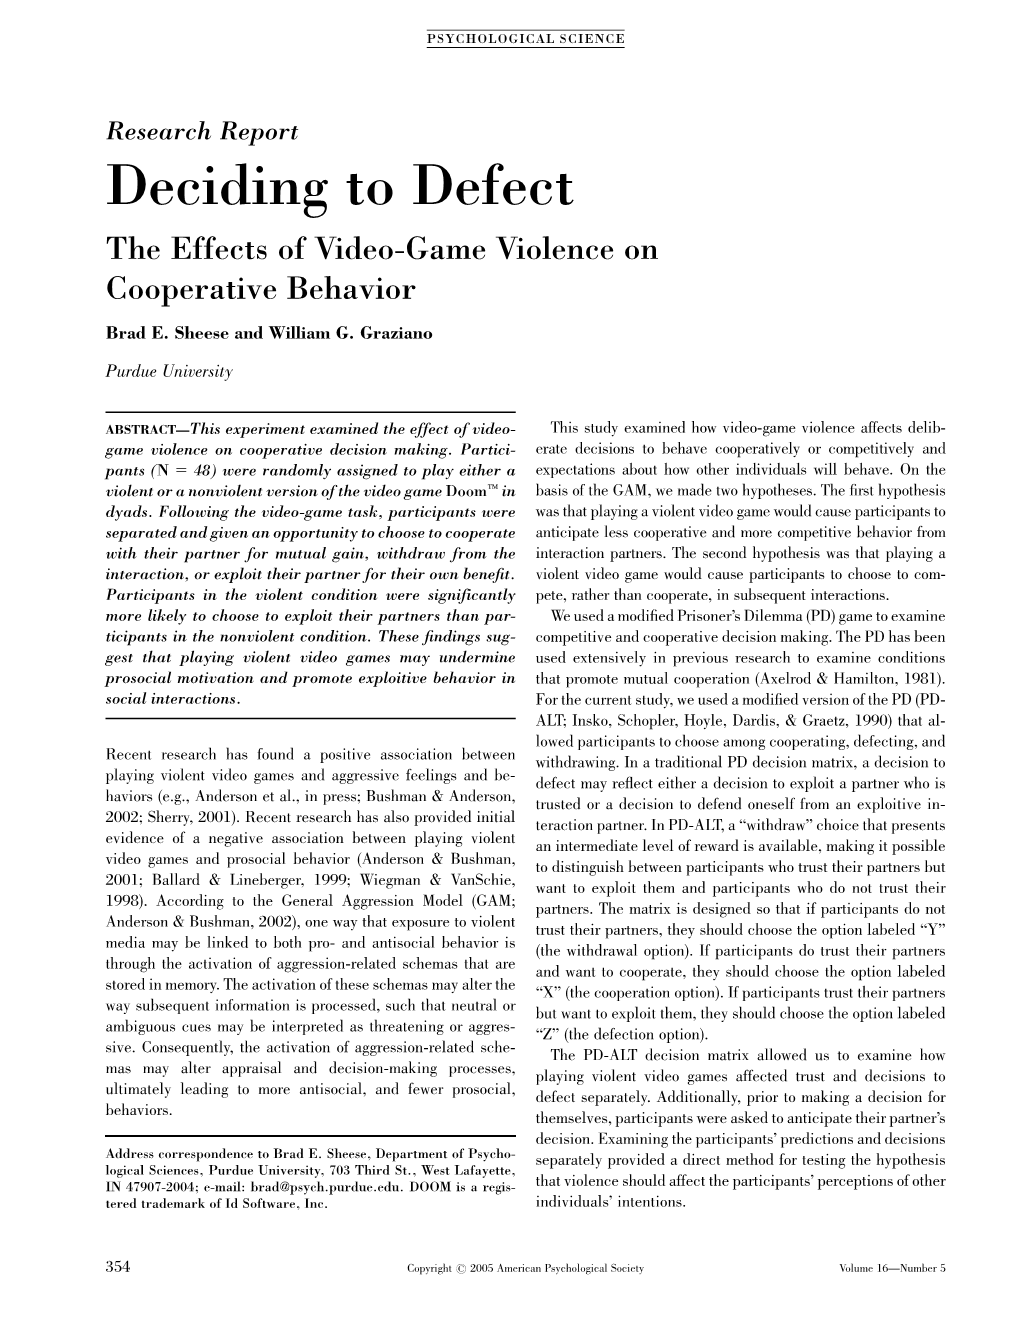 Deciding to Defect the Effects of Video-Game Violence on Cooperative Behavior Brad E